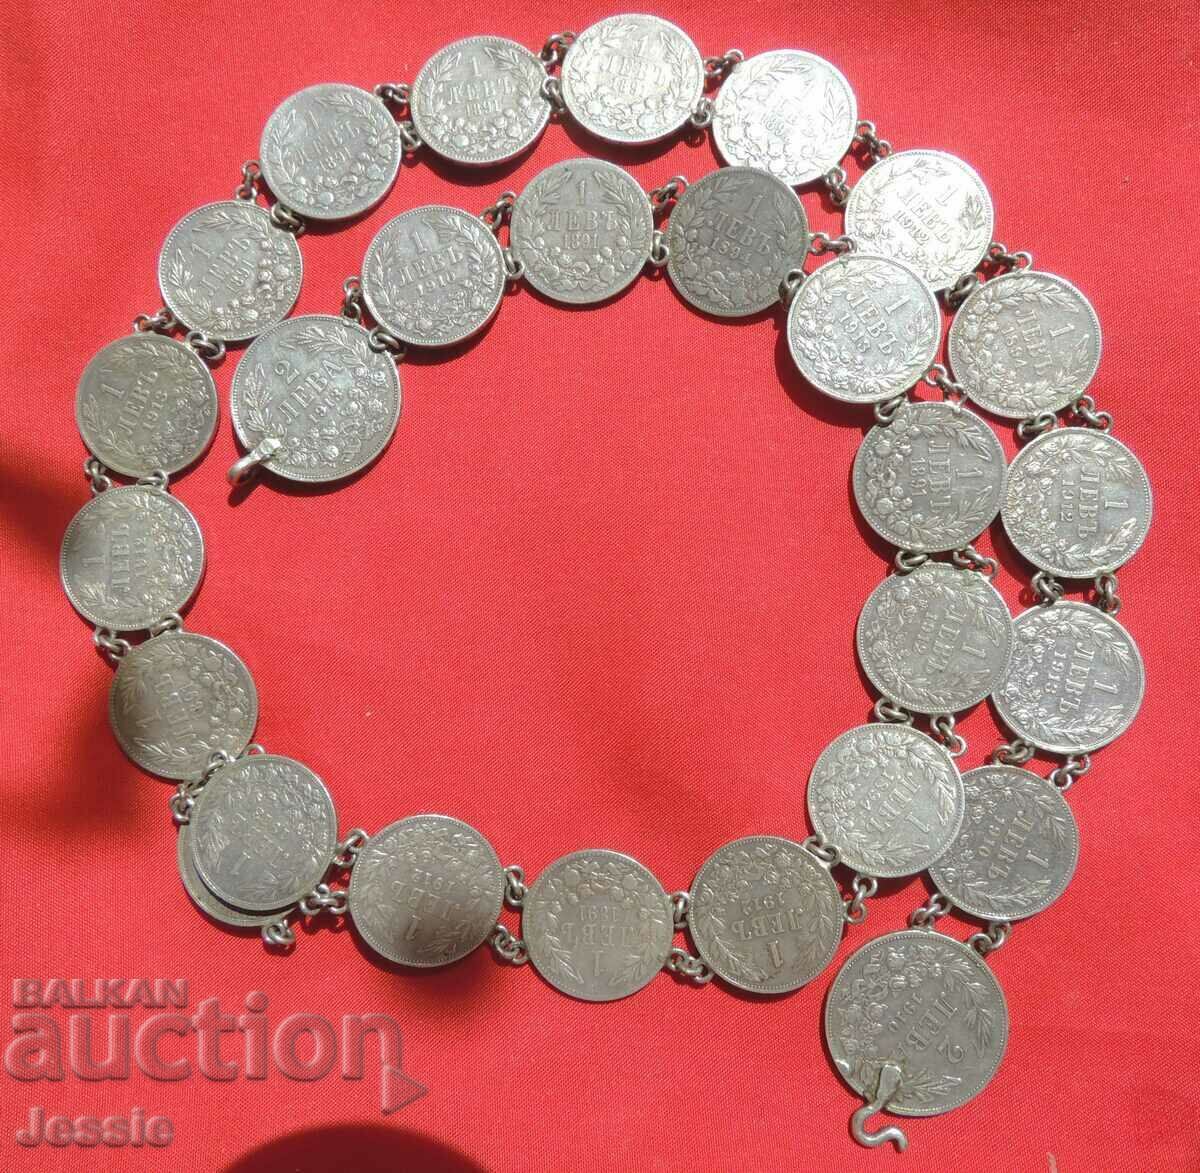 Women's jewelery belt made of silver coins of 1 and 2 leva Ferdinand